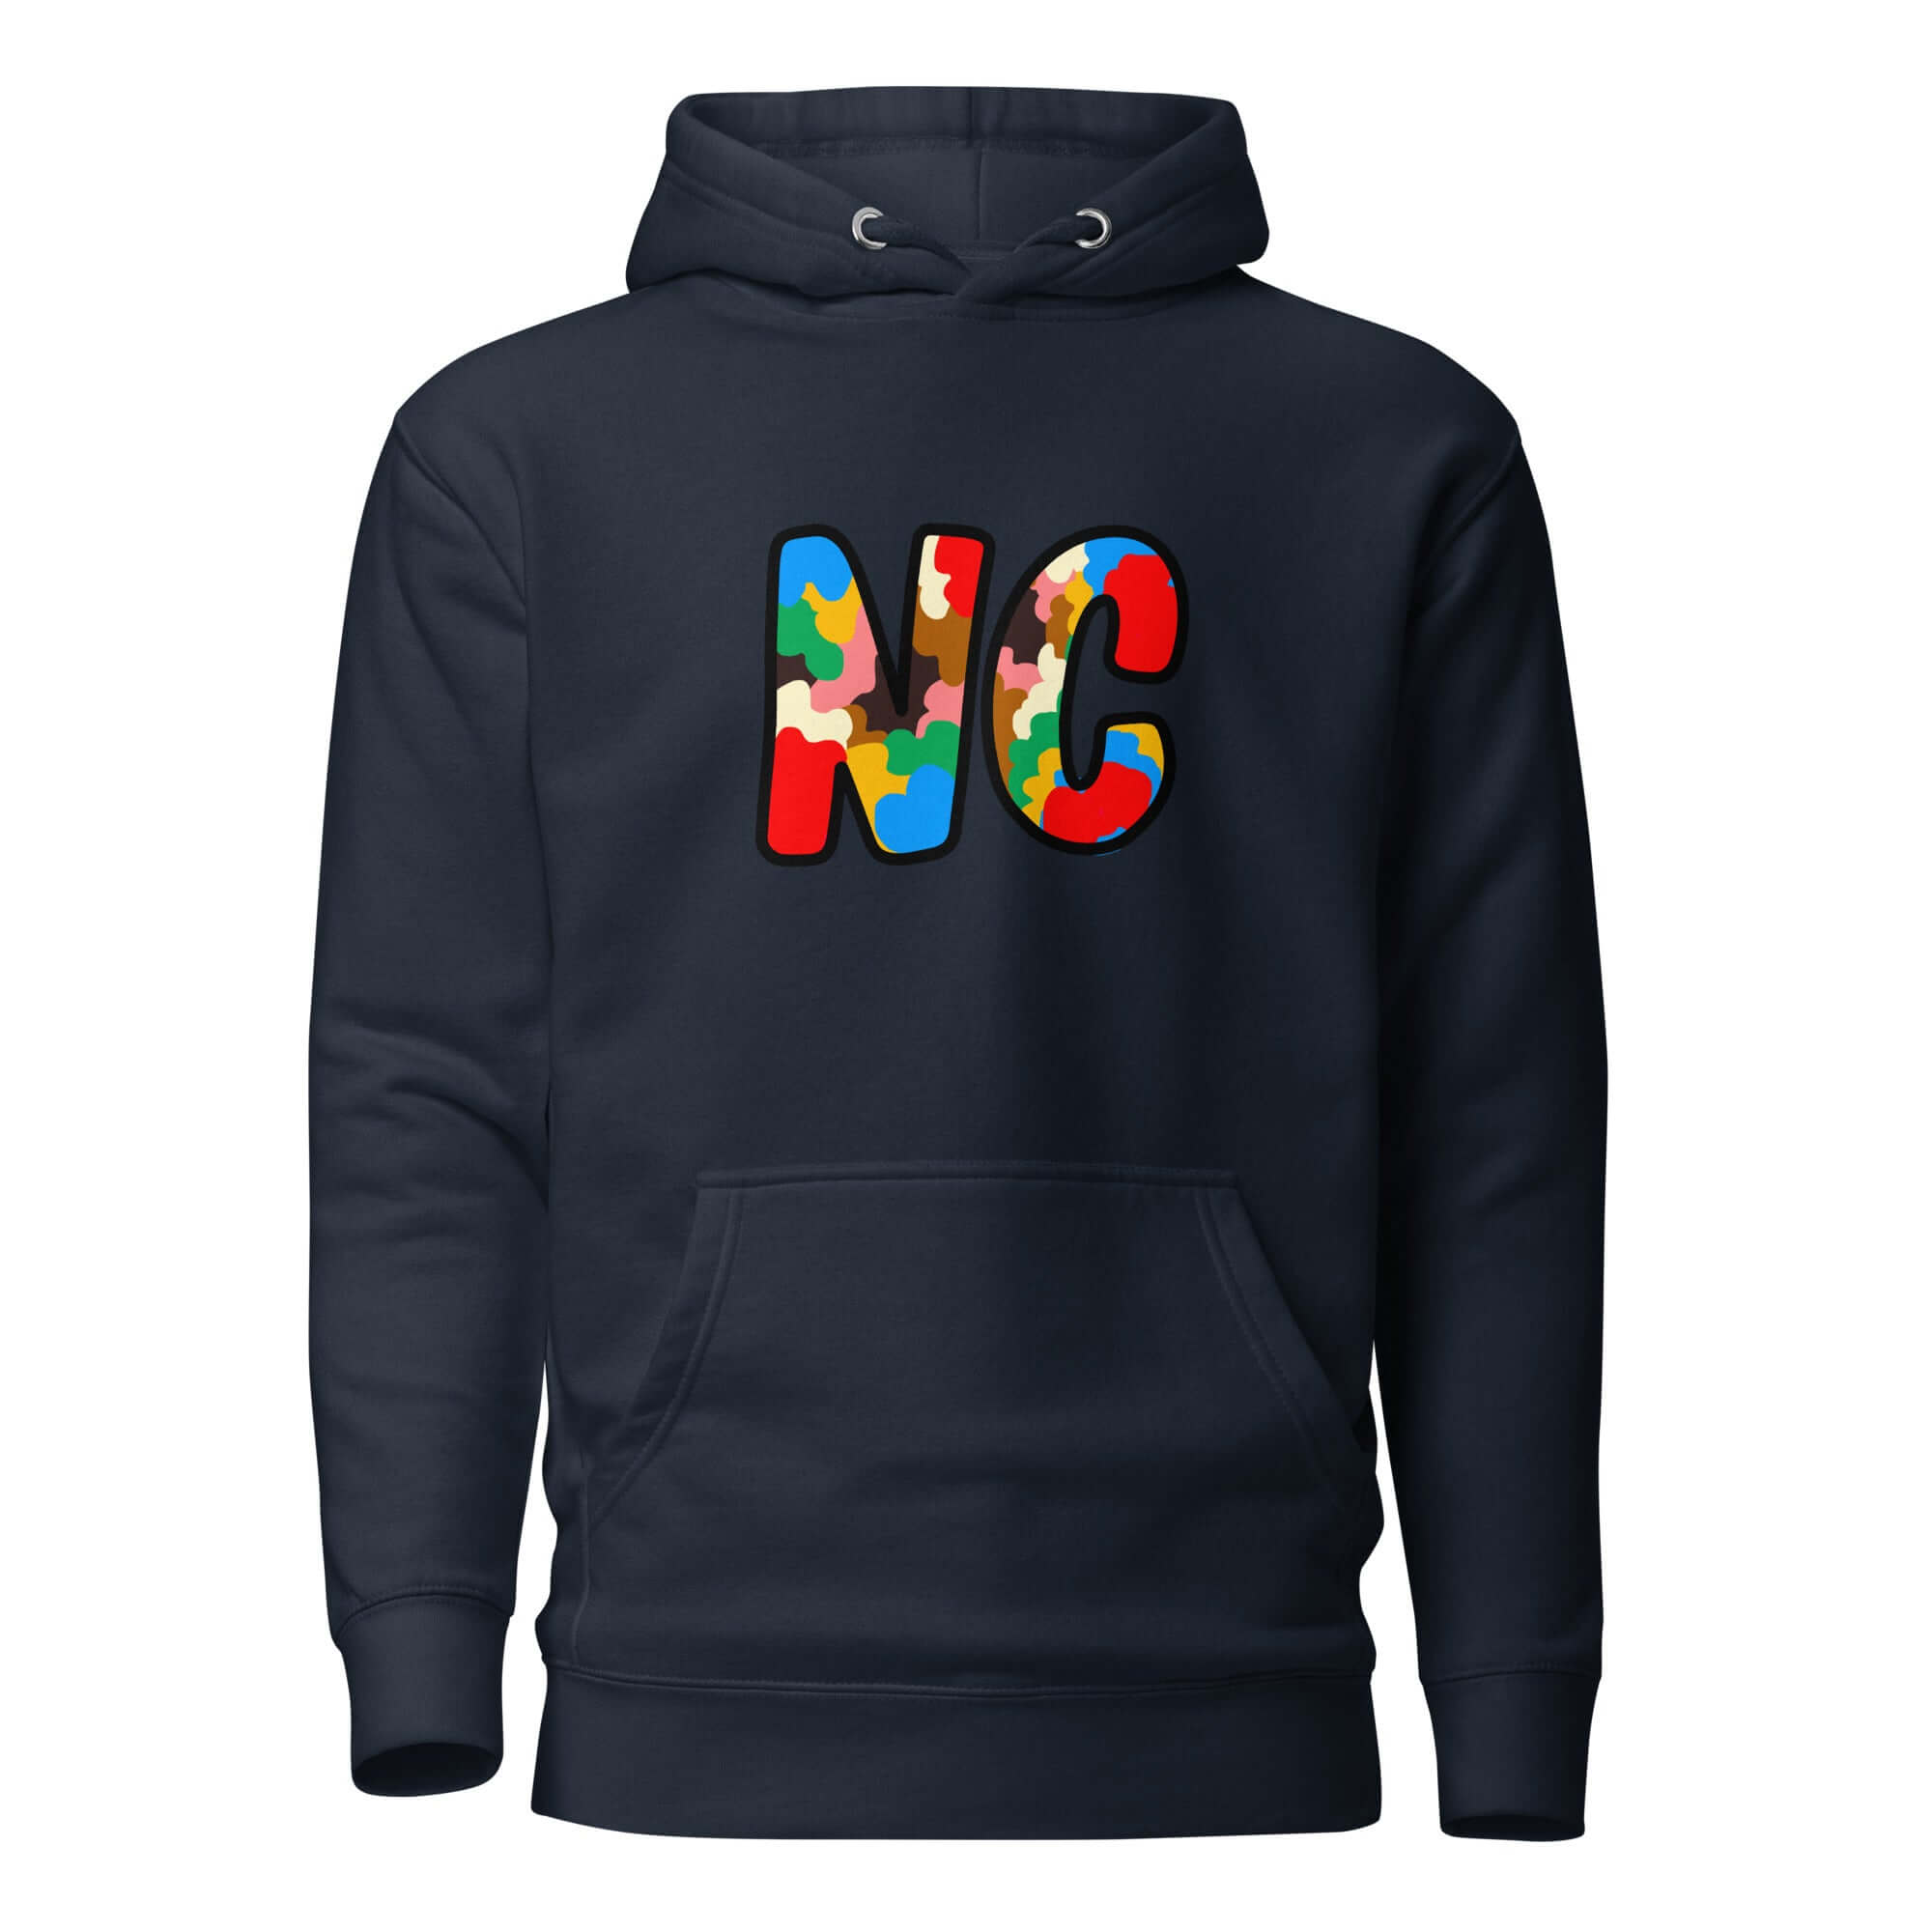 The City Collection NC Unisex Hoodie